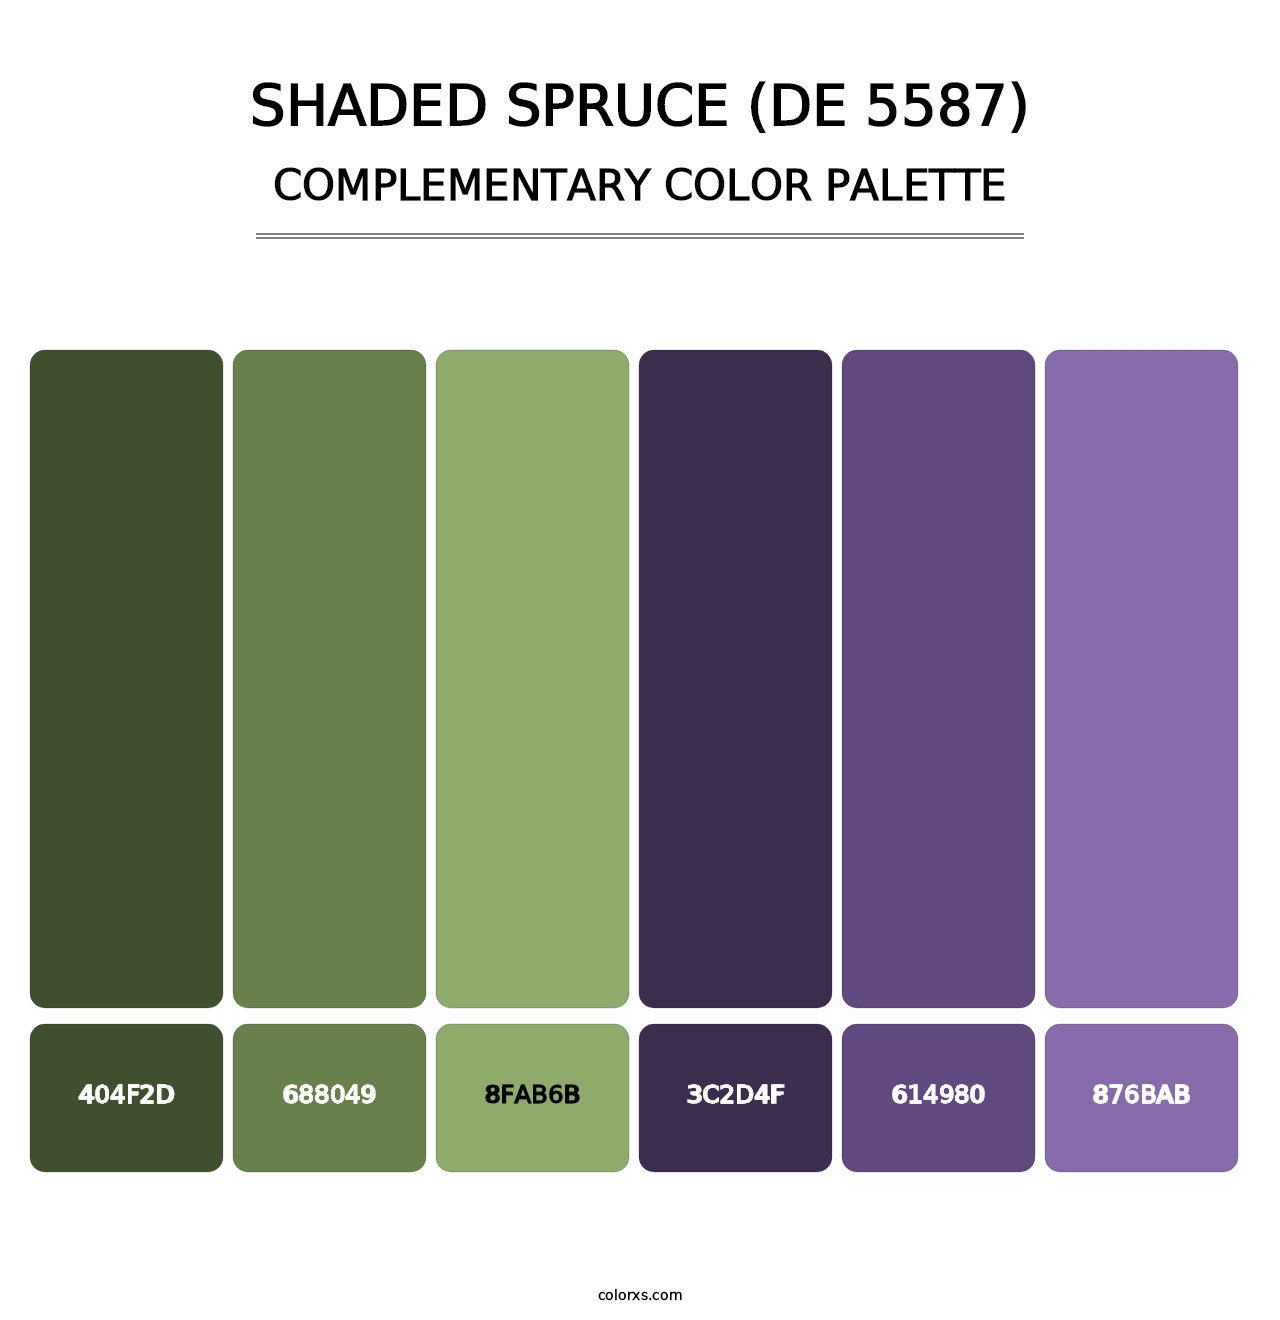 Shaded Spruce (DE 5587) - Complementary Color Palette